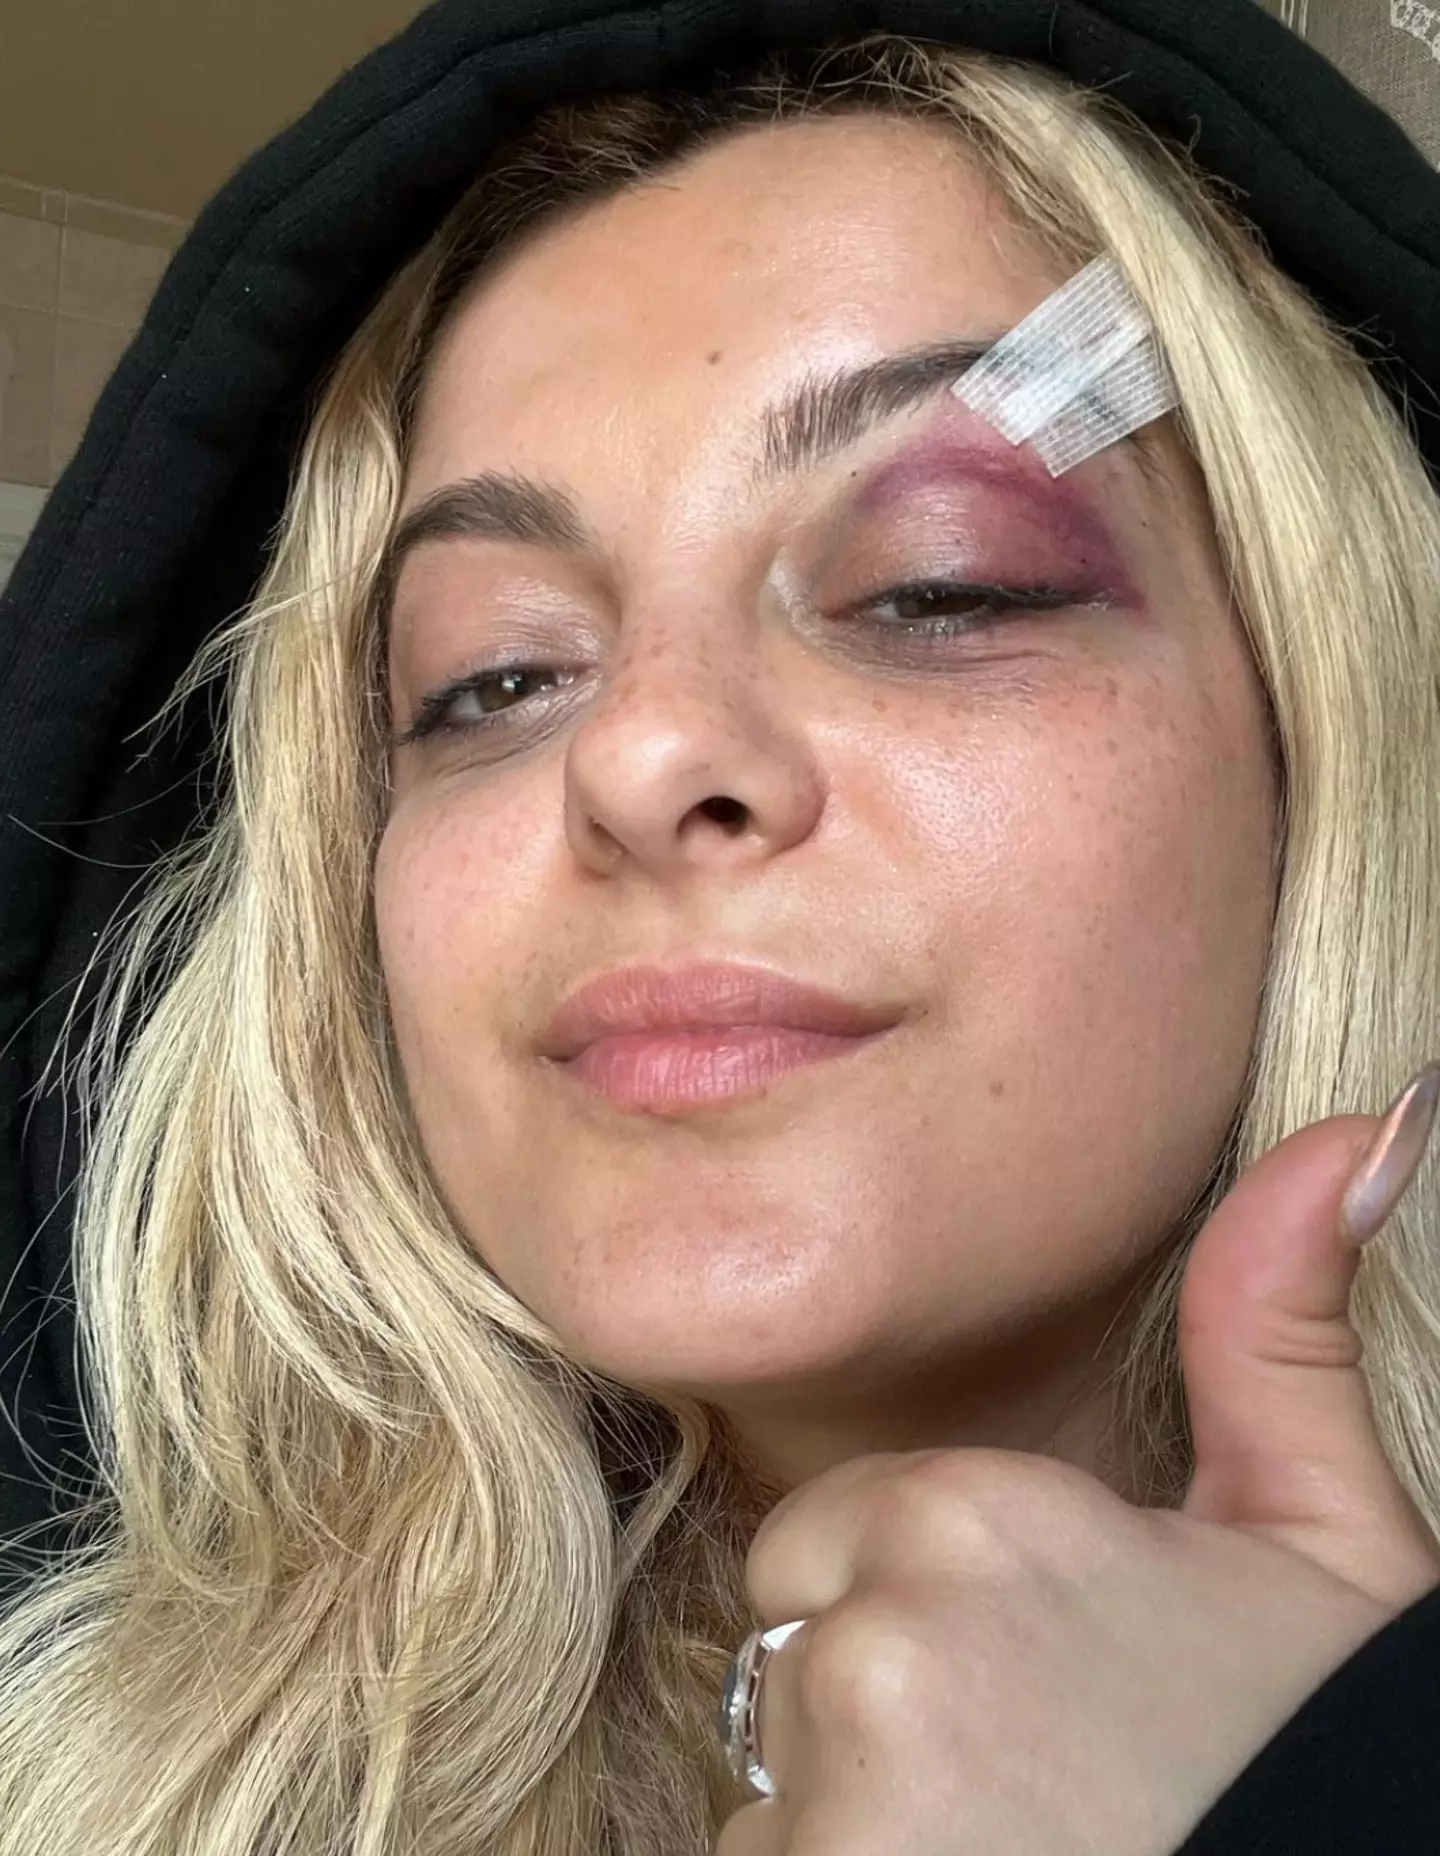 Bebe Rexha updated fans with a picture of her injuries.